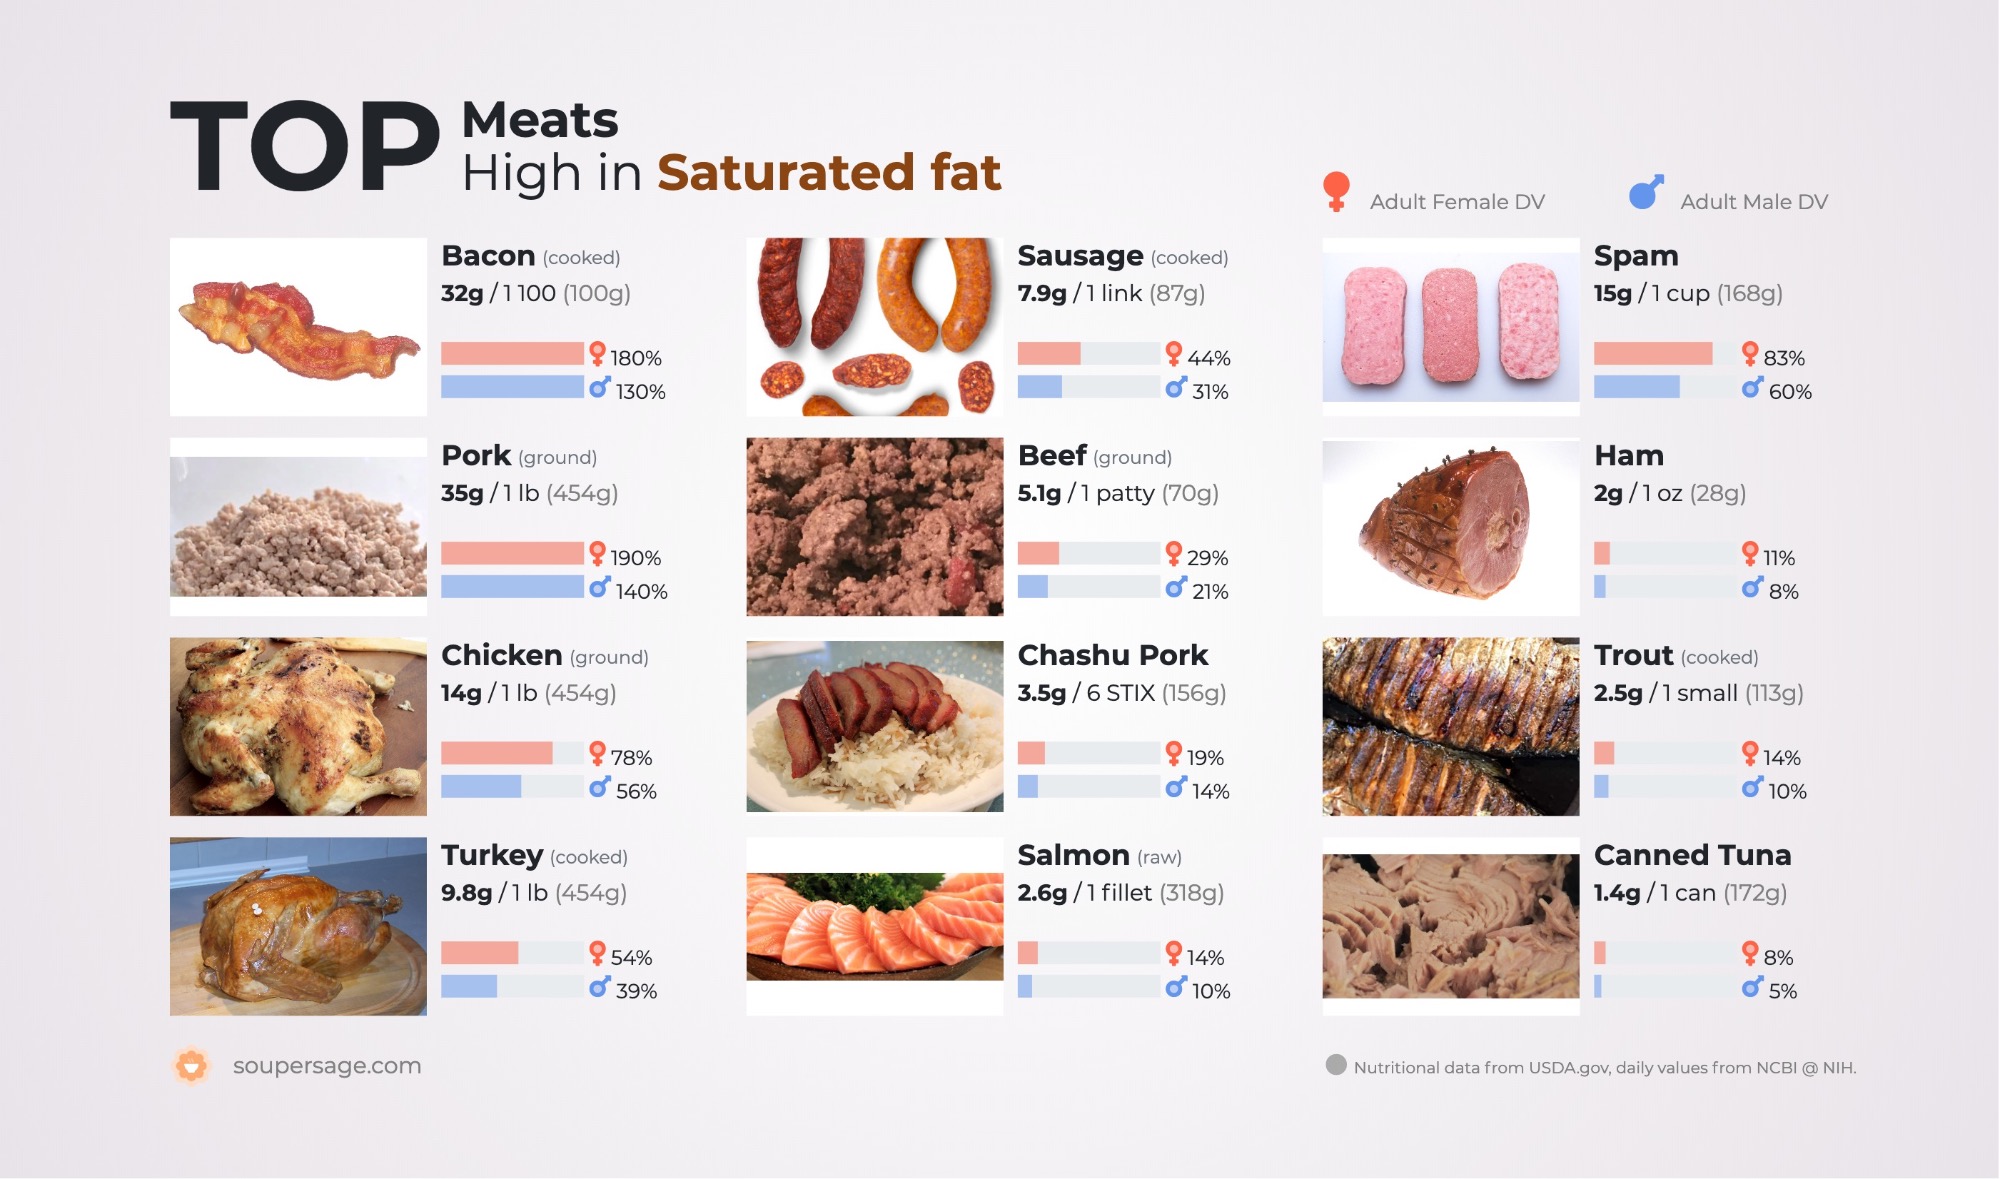 image of Top Meats High in Saturated fat